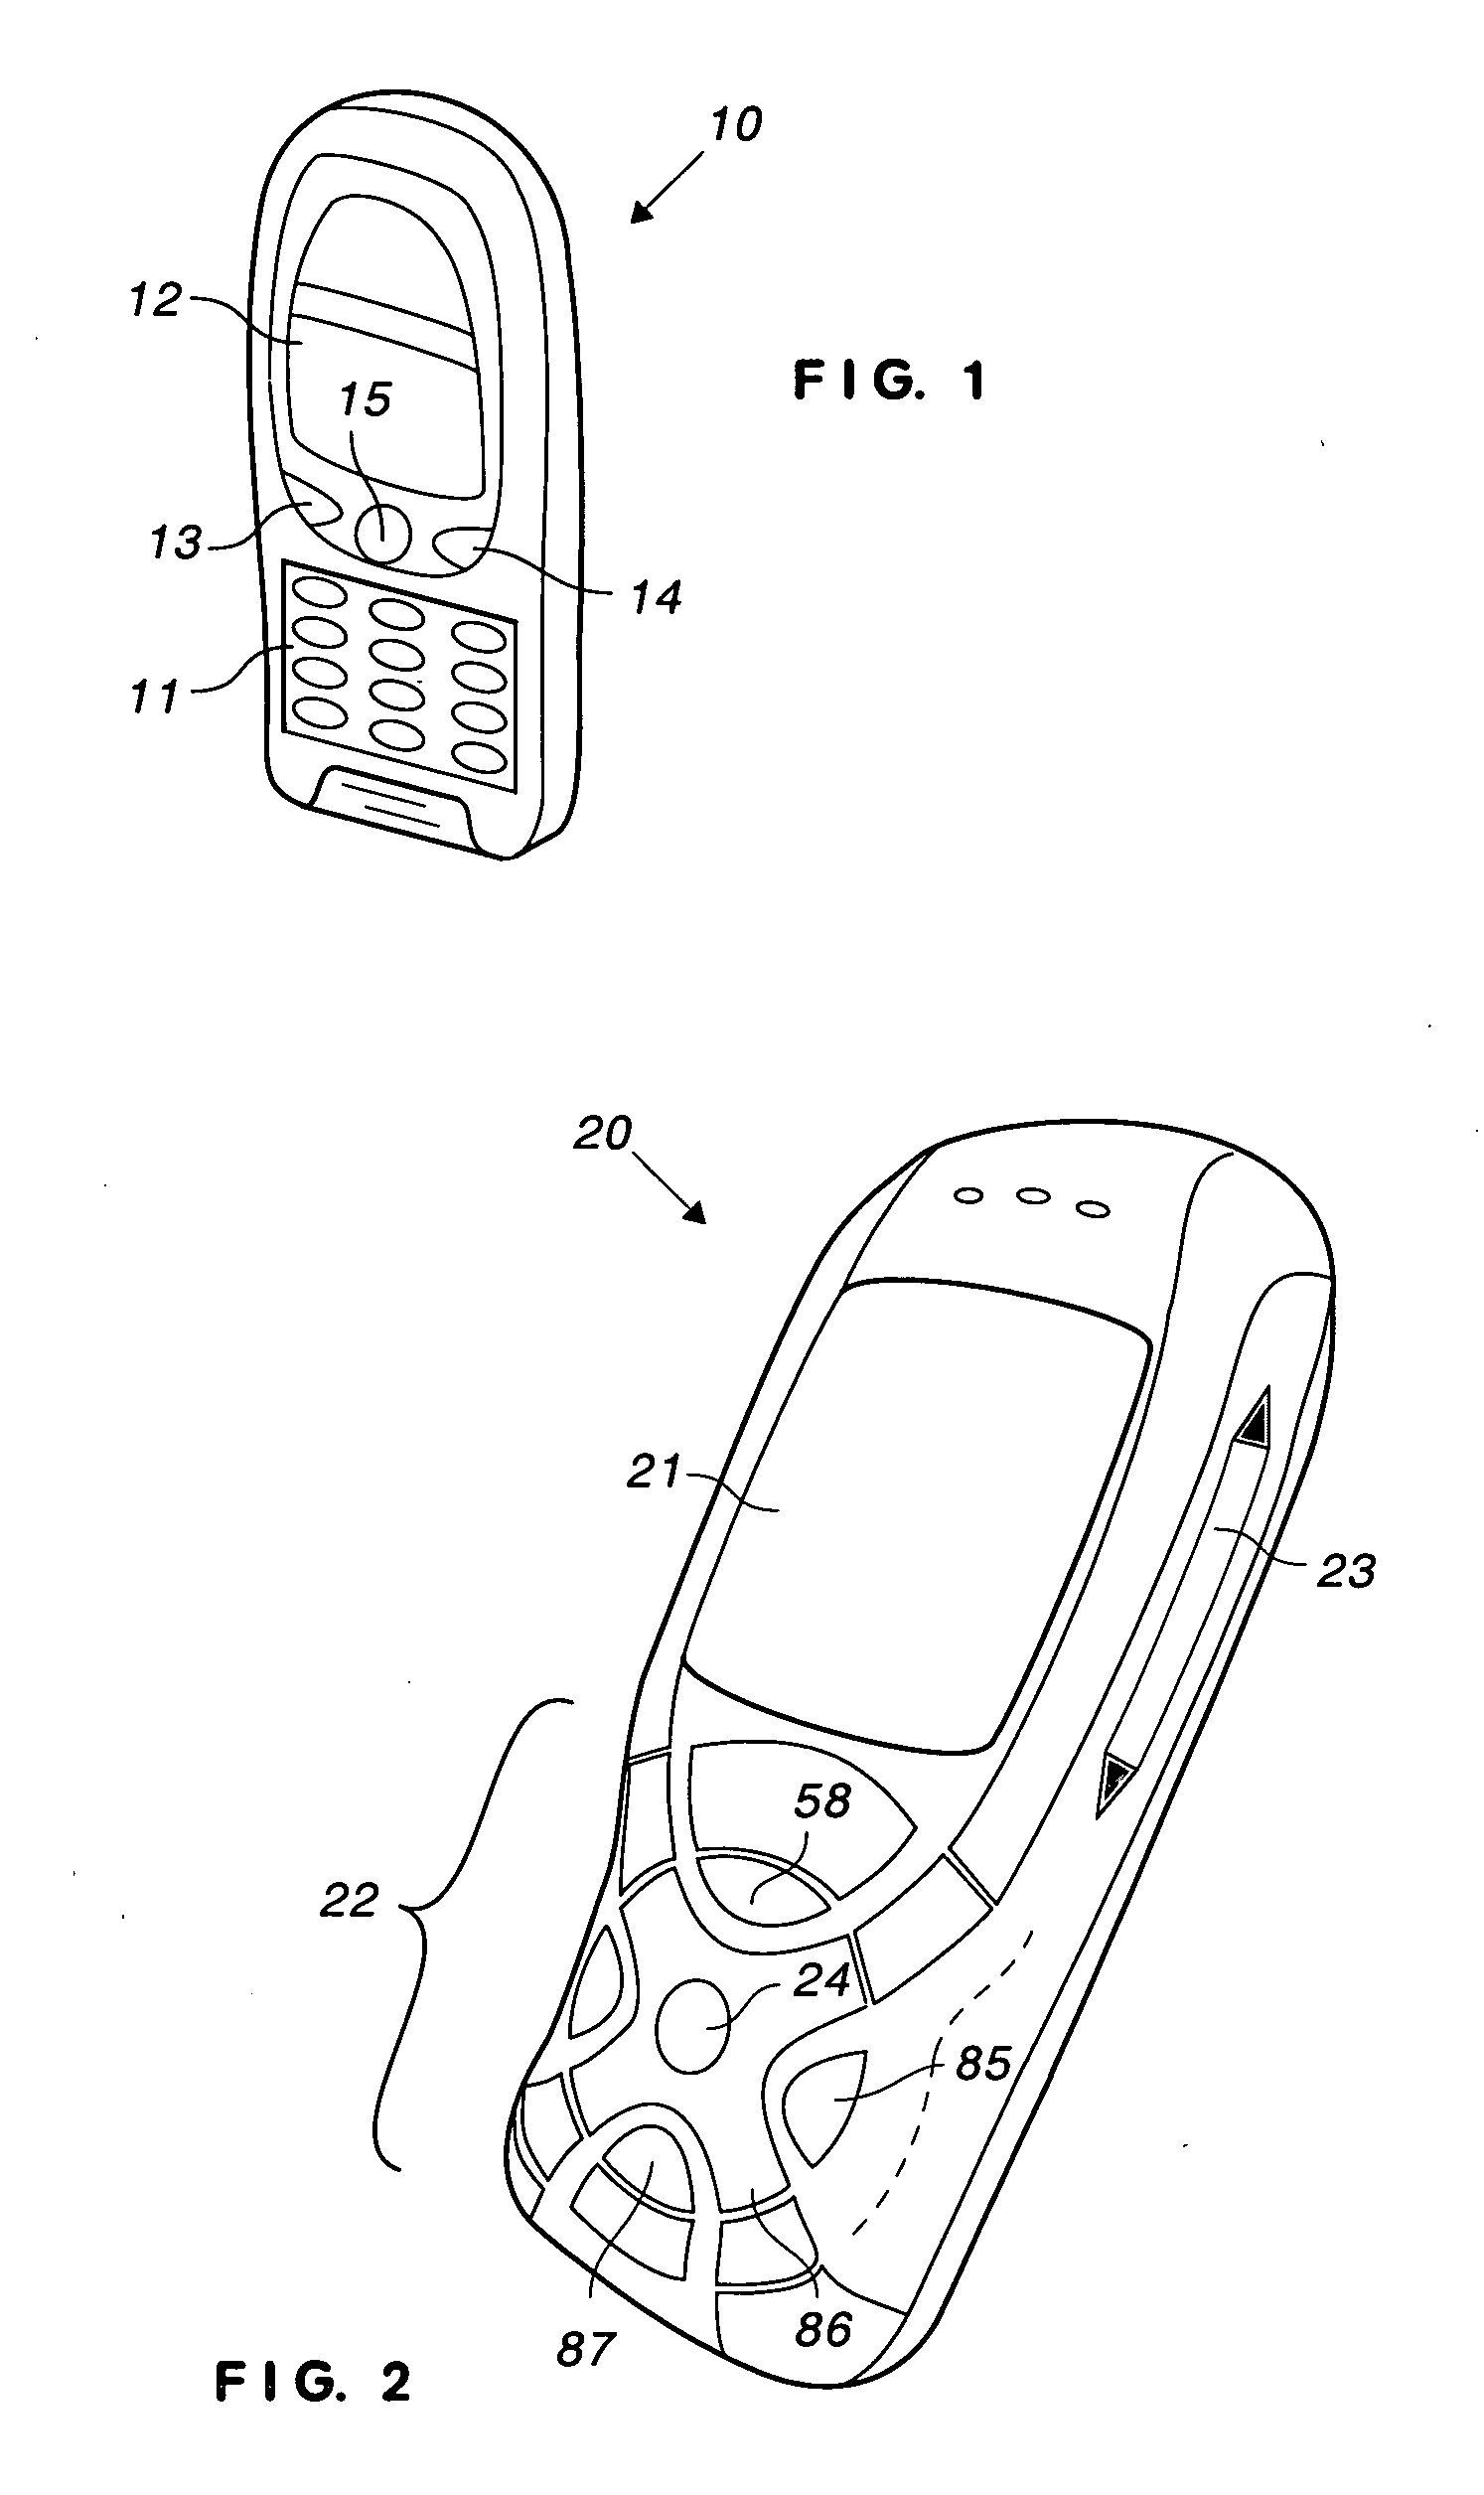 Capacitive touch sensor with integral EL backlight